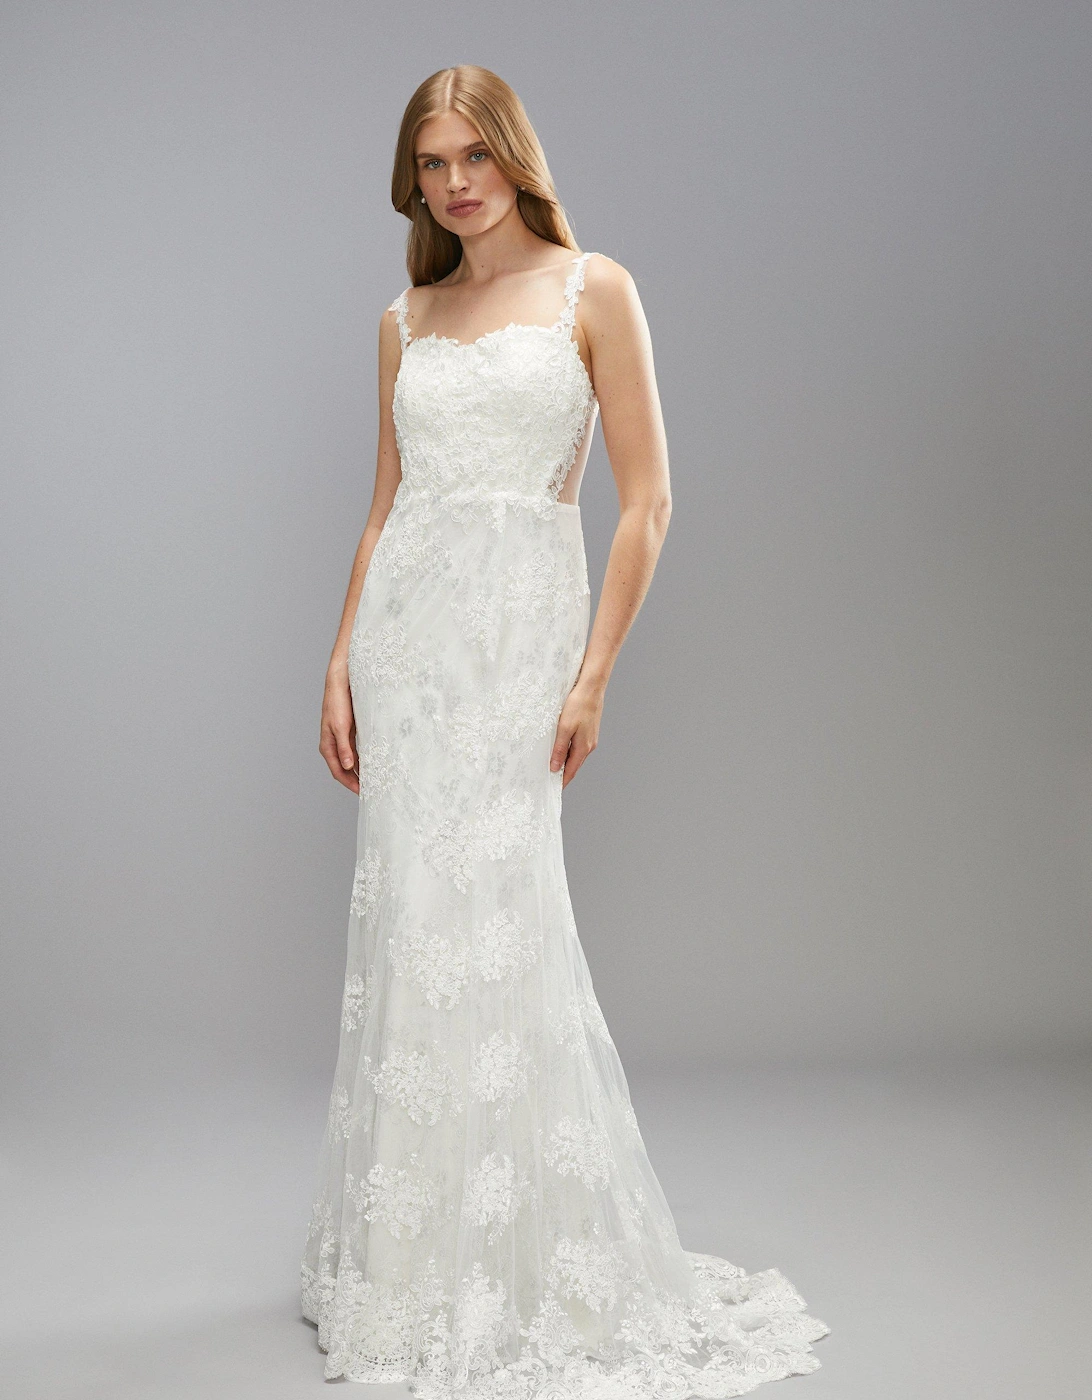 Premium Sweetheart Lace Applique Strappy Wedding Dress, 7 of 6